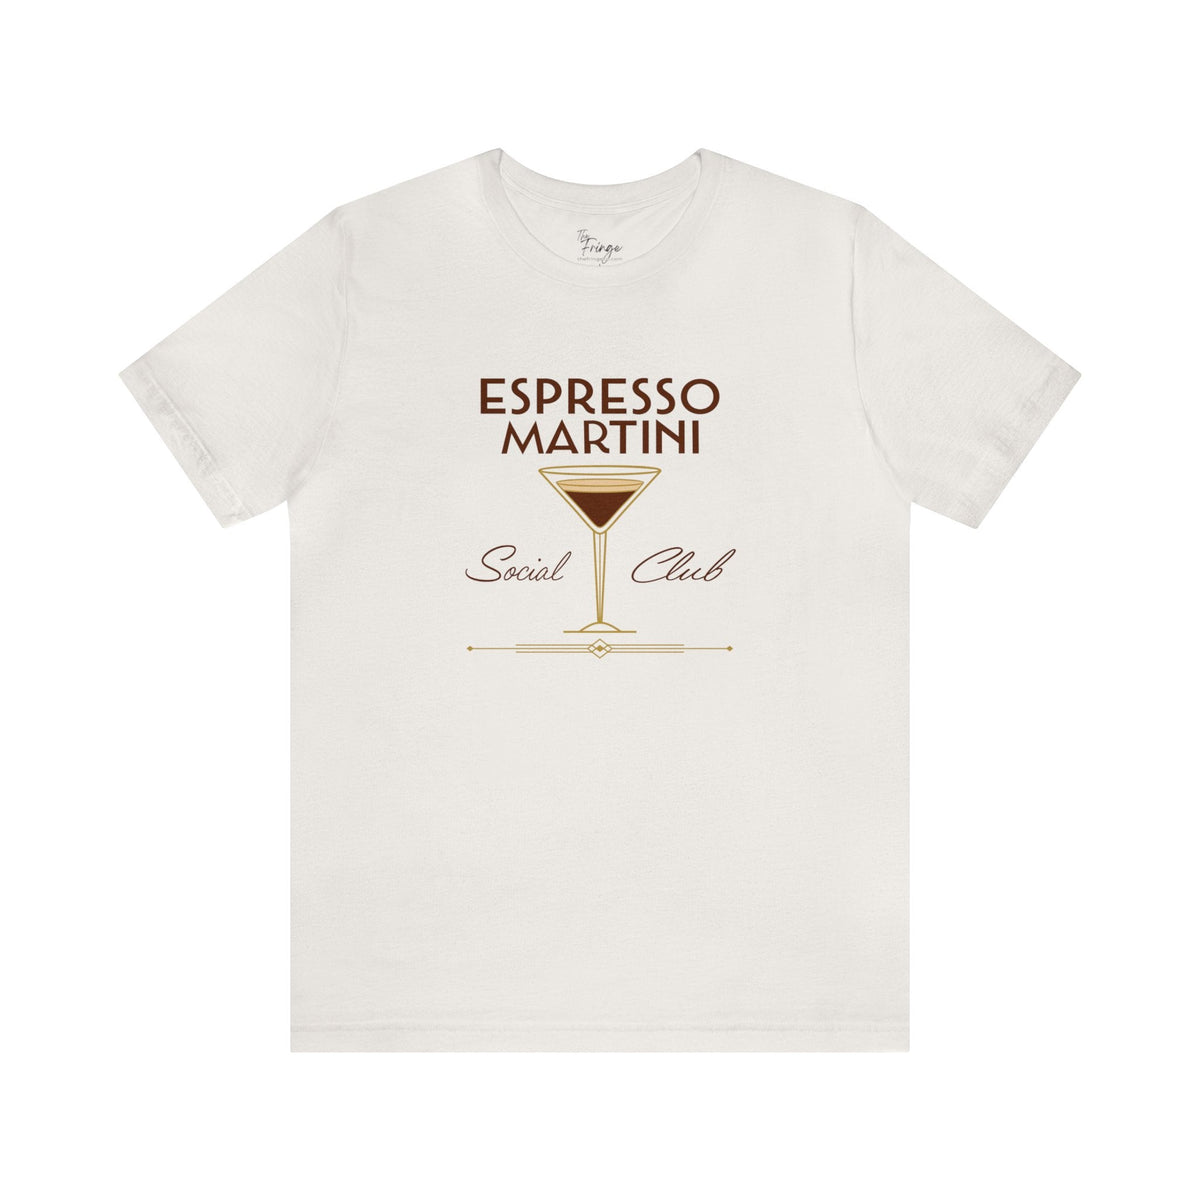 Espresso Martini Social Club Graphic Tee | Girls Night | Cocktail Lover | Rooftop Bar Life T-Shirt TheFringeCultureCollective